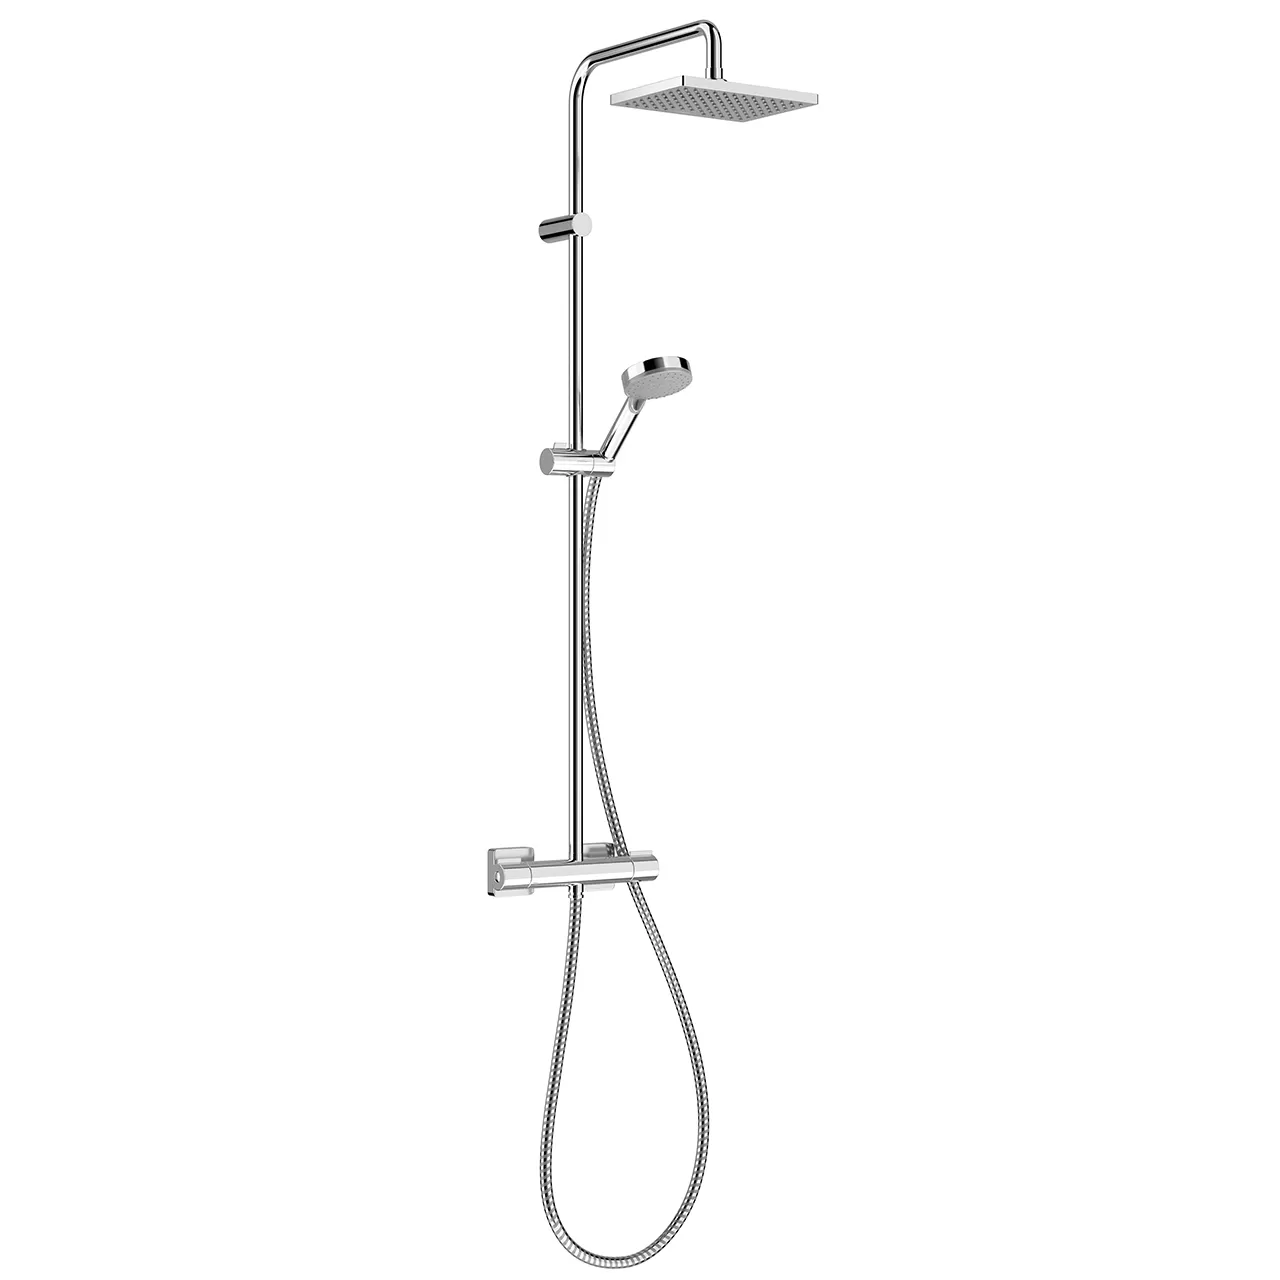 Bathroom – vernis-shape-showerpipe-230-thermostat-by-hansgrohe